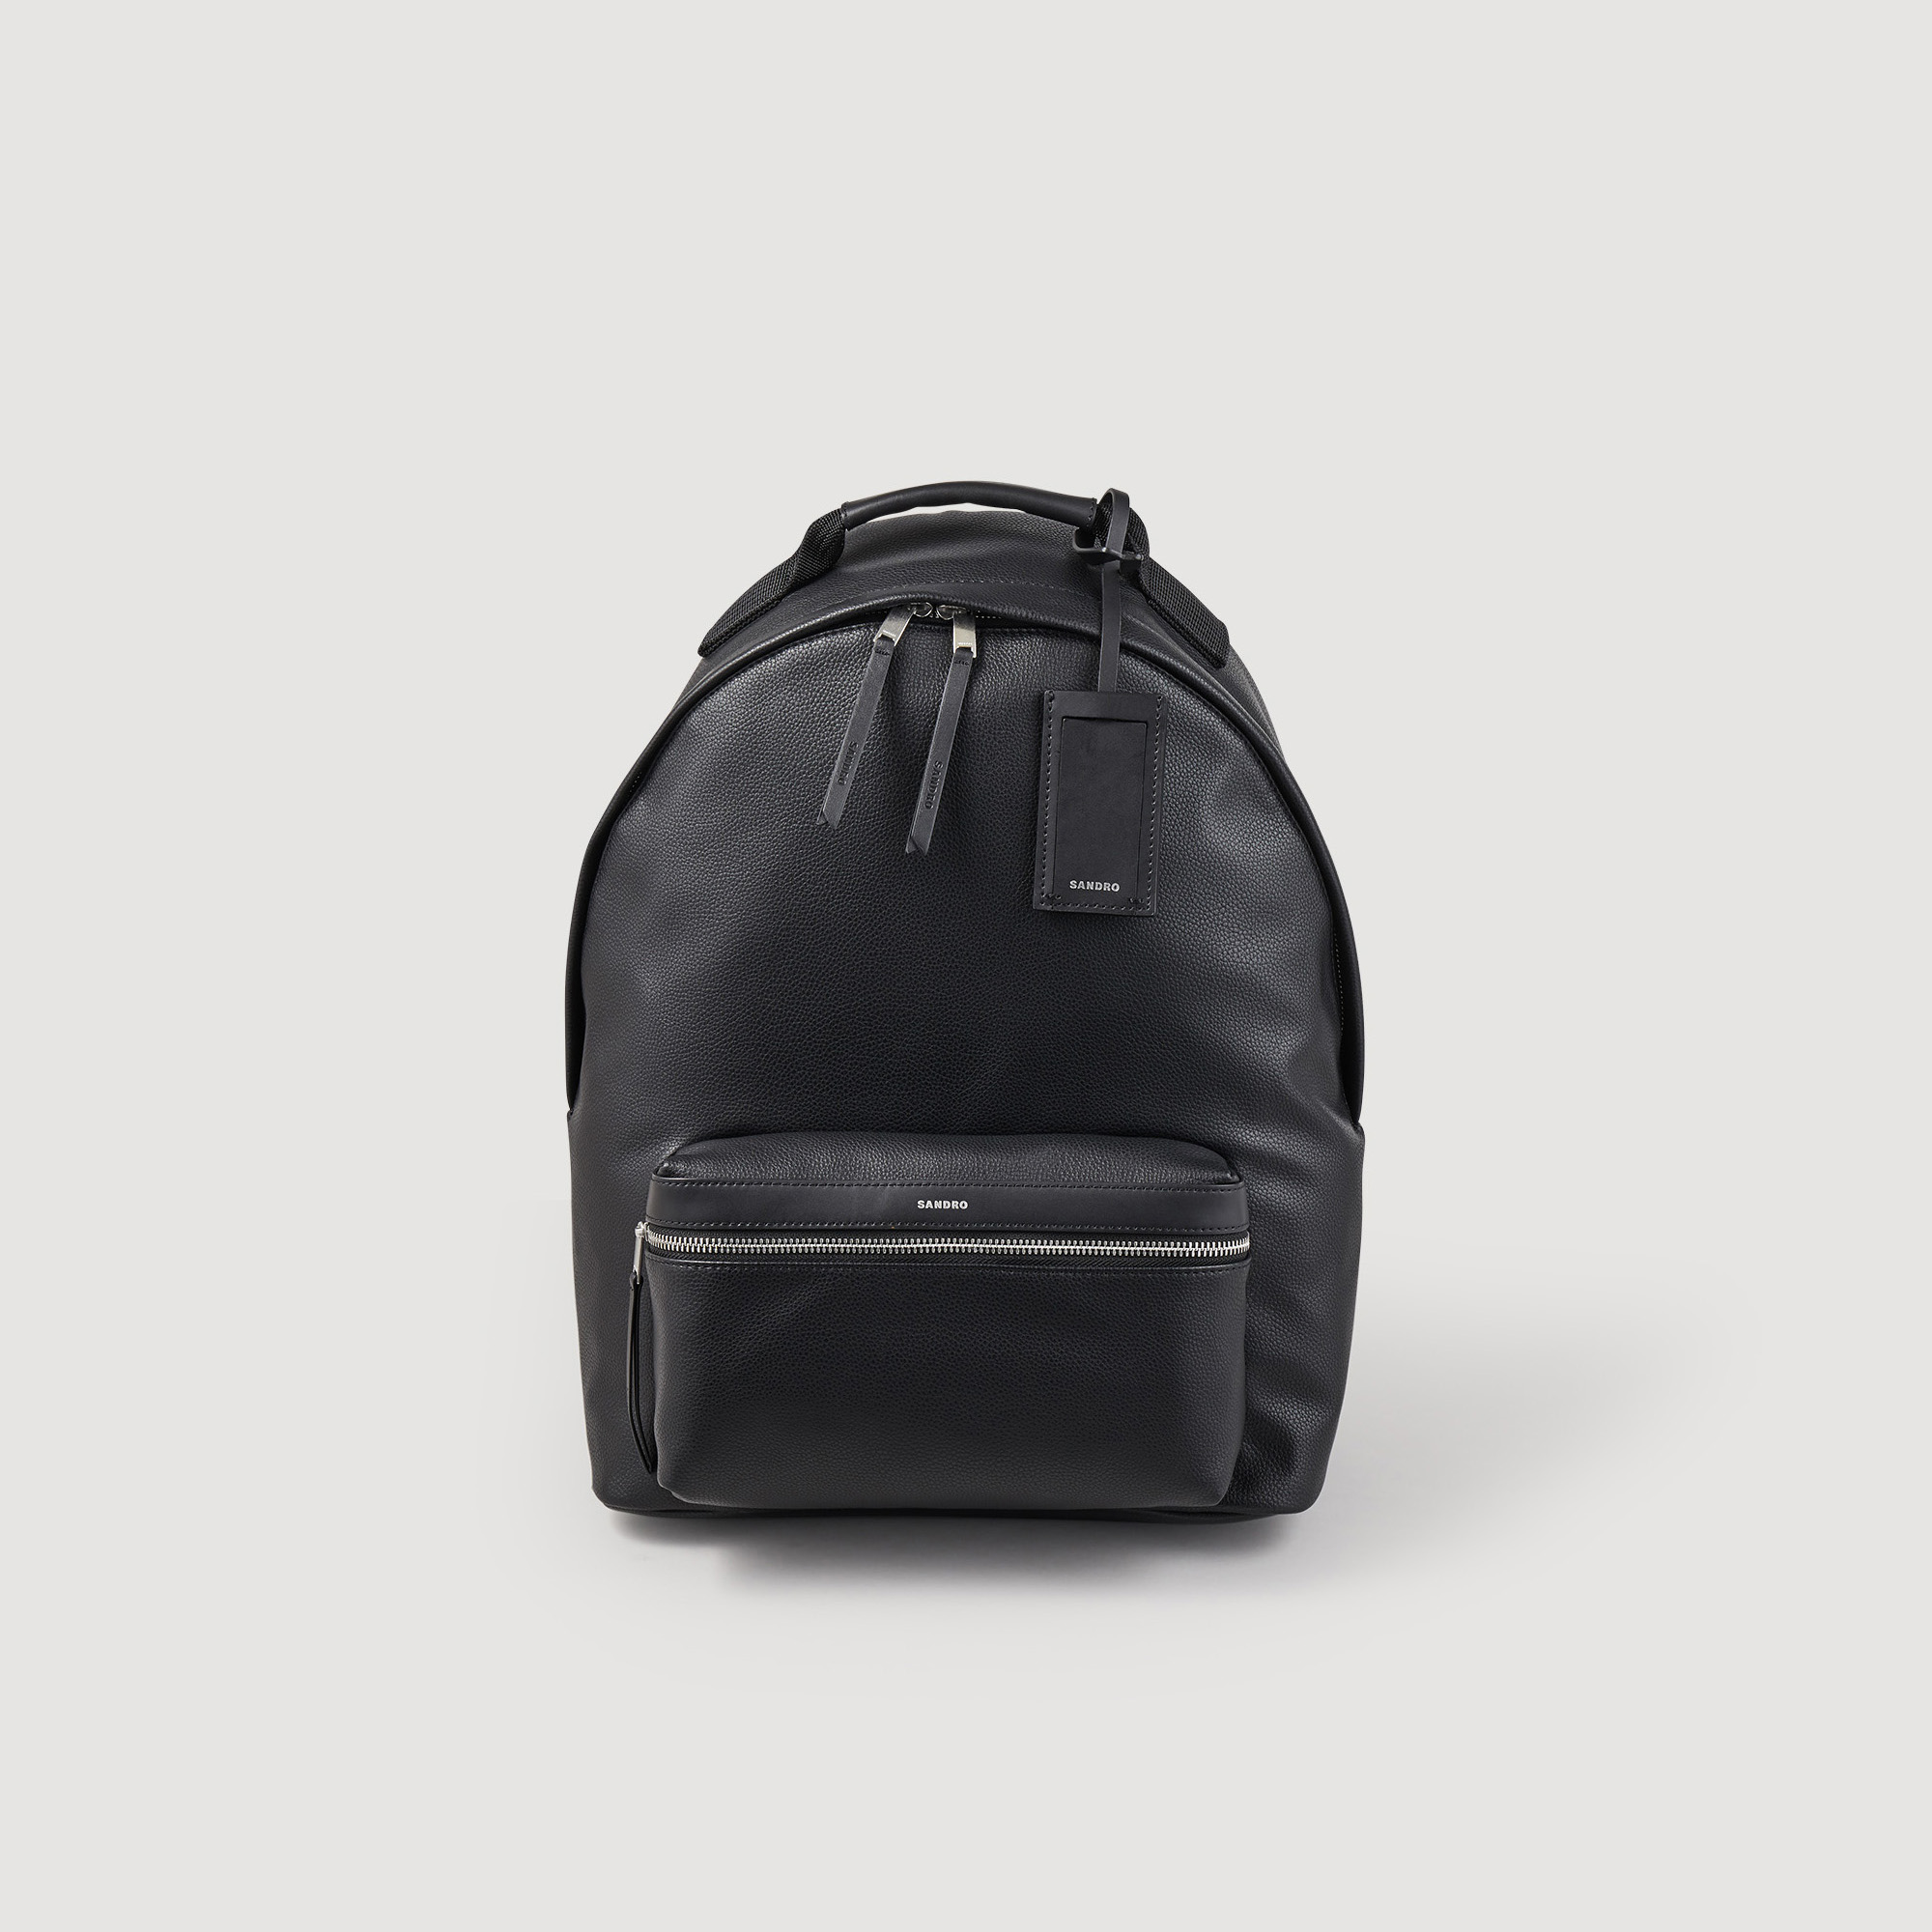 Sandro polyester Lining: Sandro men's backpack â€¢ Coated canvas â€¢ Double zip fastening with logo â€¢ Zipped main compartment â€¢ Outer pocket with embossed leather trim â€¢ Two inside pockets, one of them zipped â€¢ Adjustable padded straps